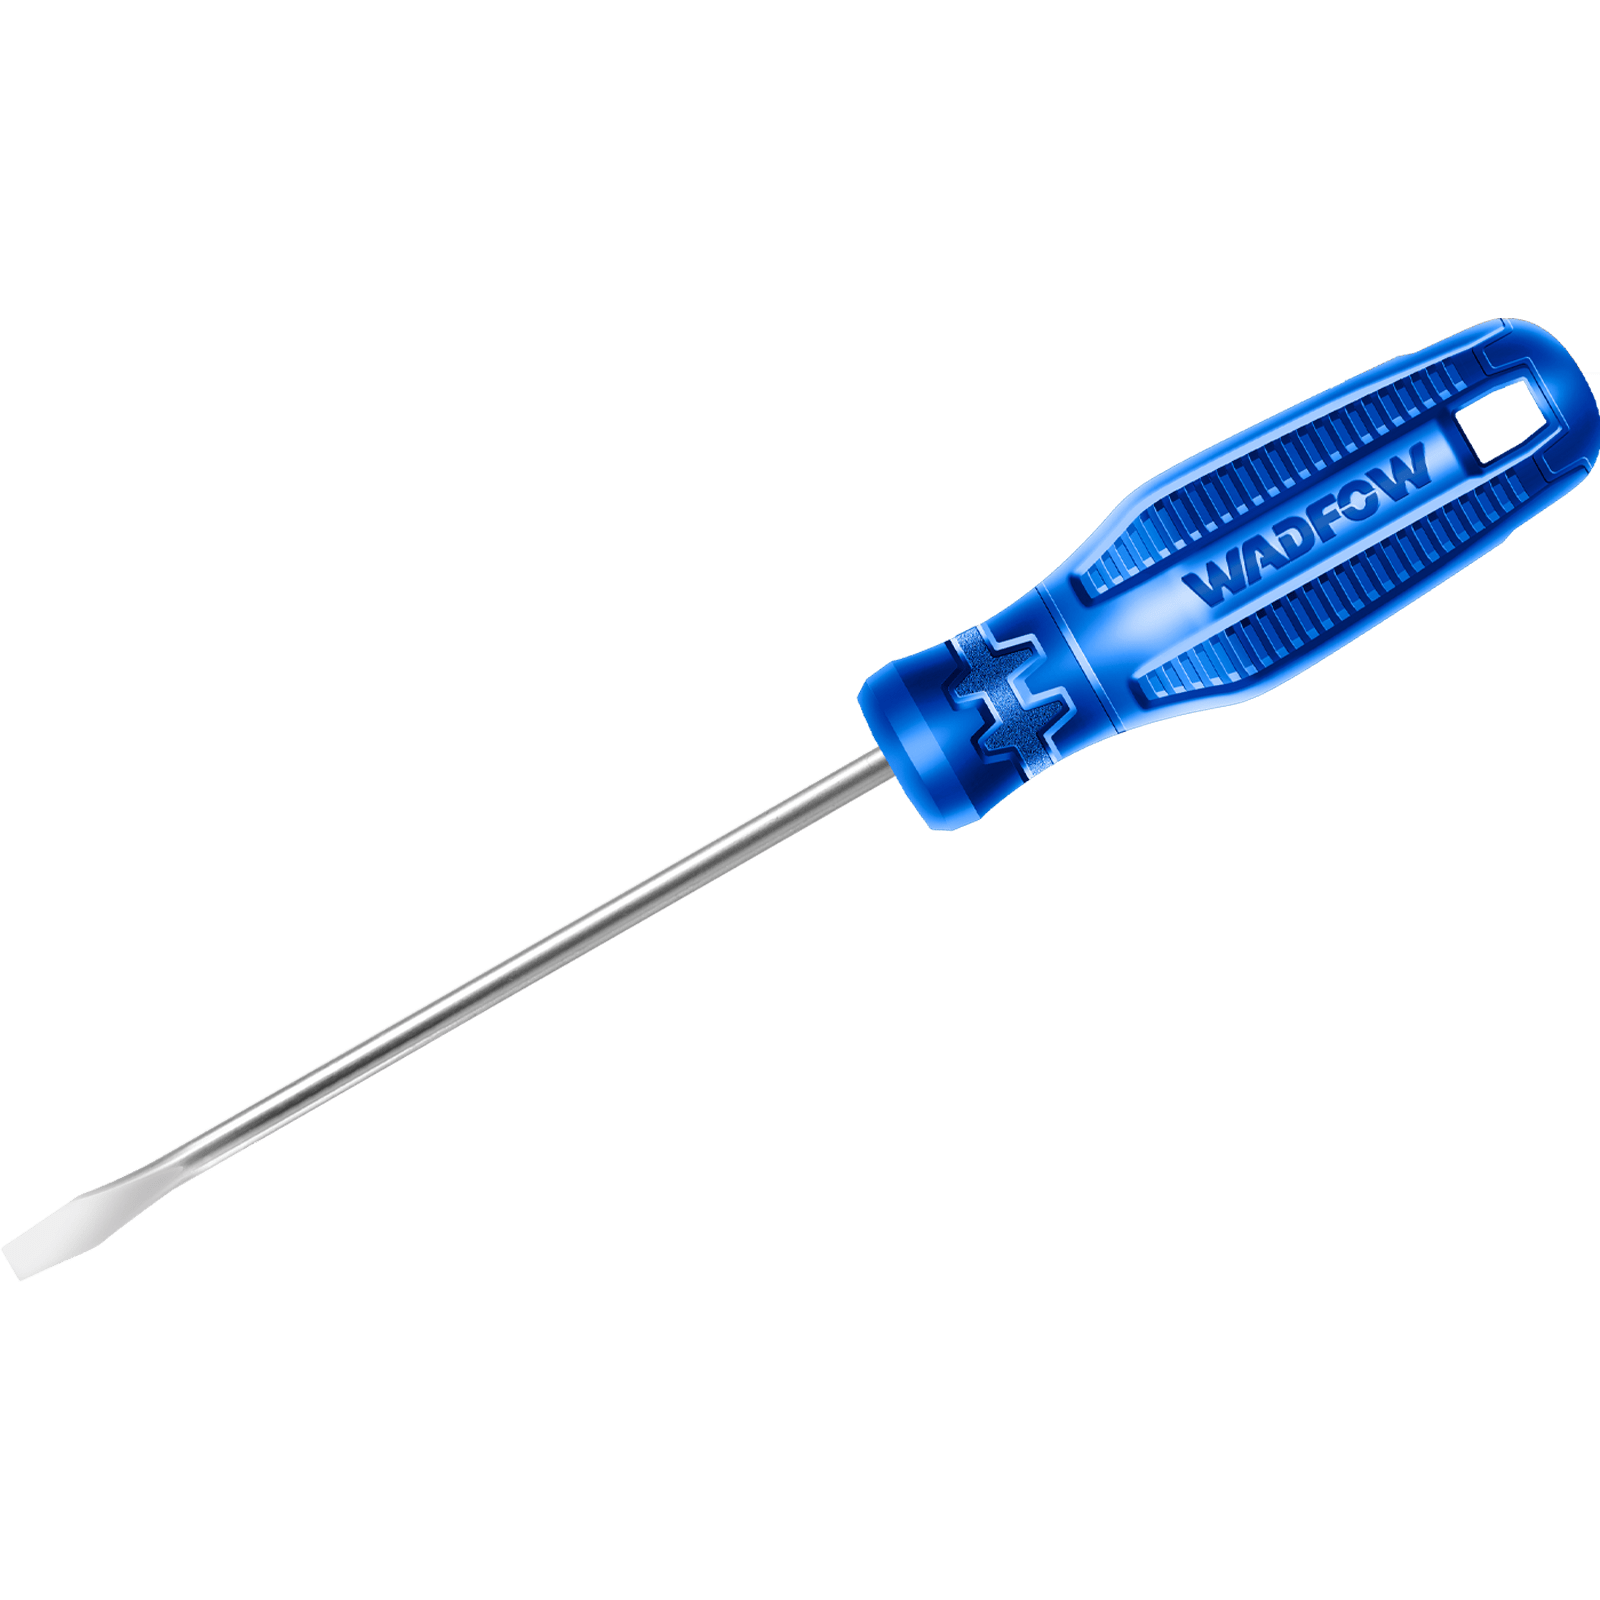 Wadfow 100mm Slotted Screwdriver | Supply Master Accra, Ghana Screwdrivers Buy Tools hardware Building materials